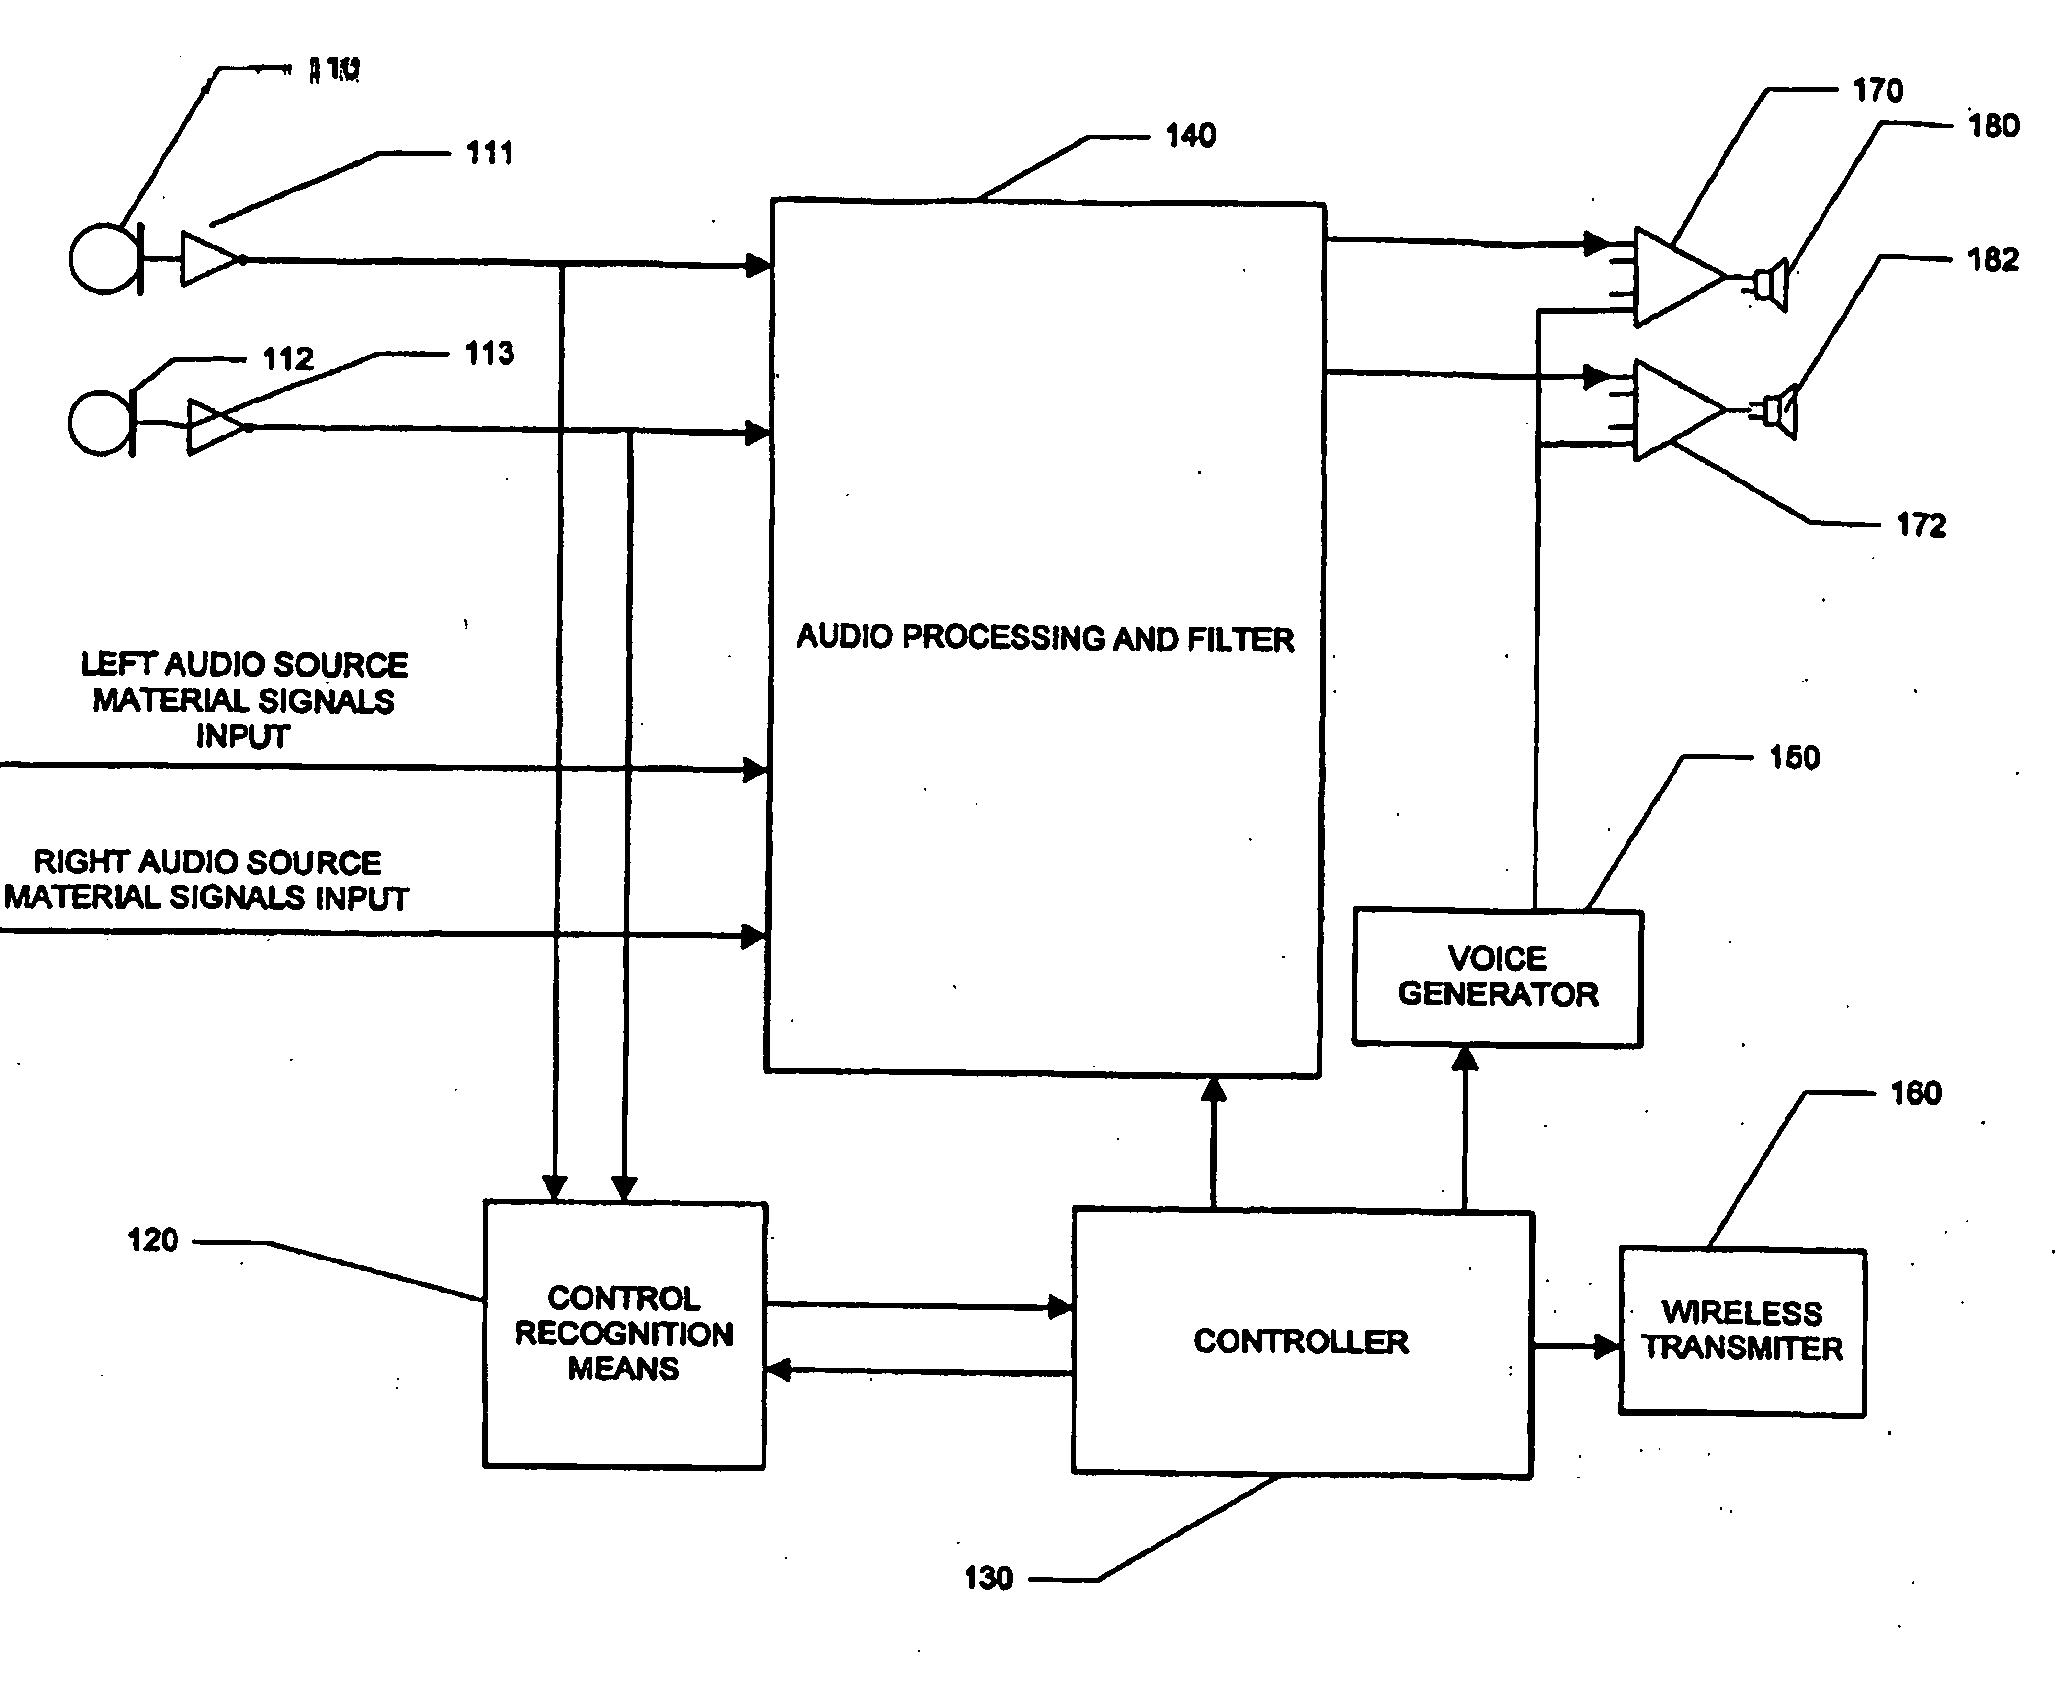 Method and apparatus for controlling a headphone